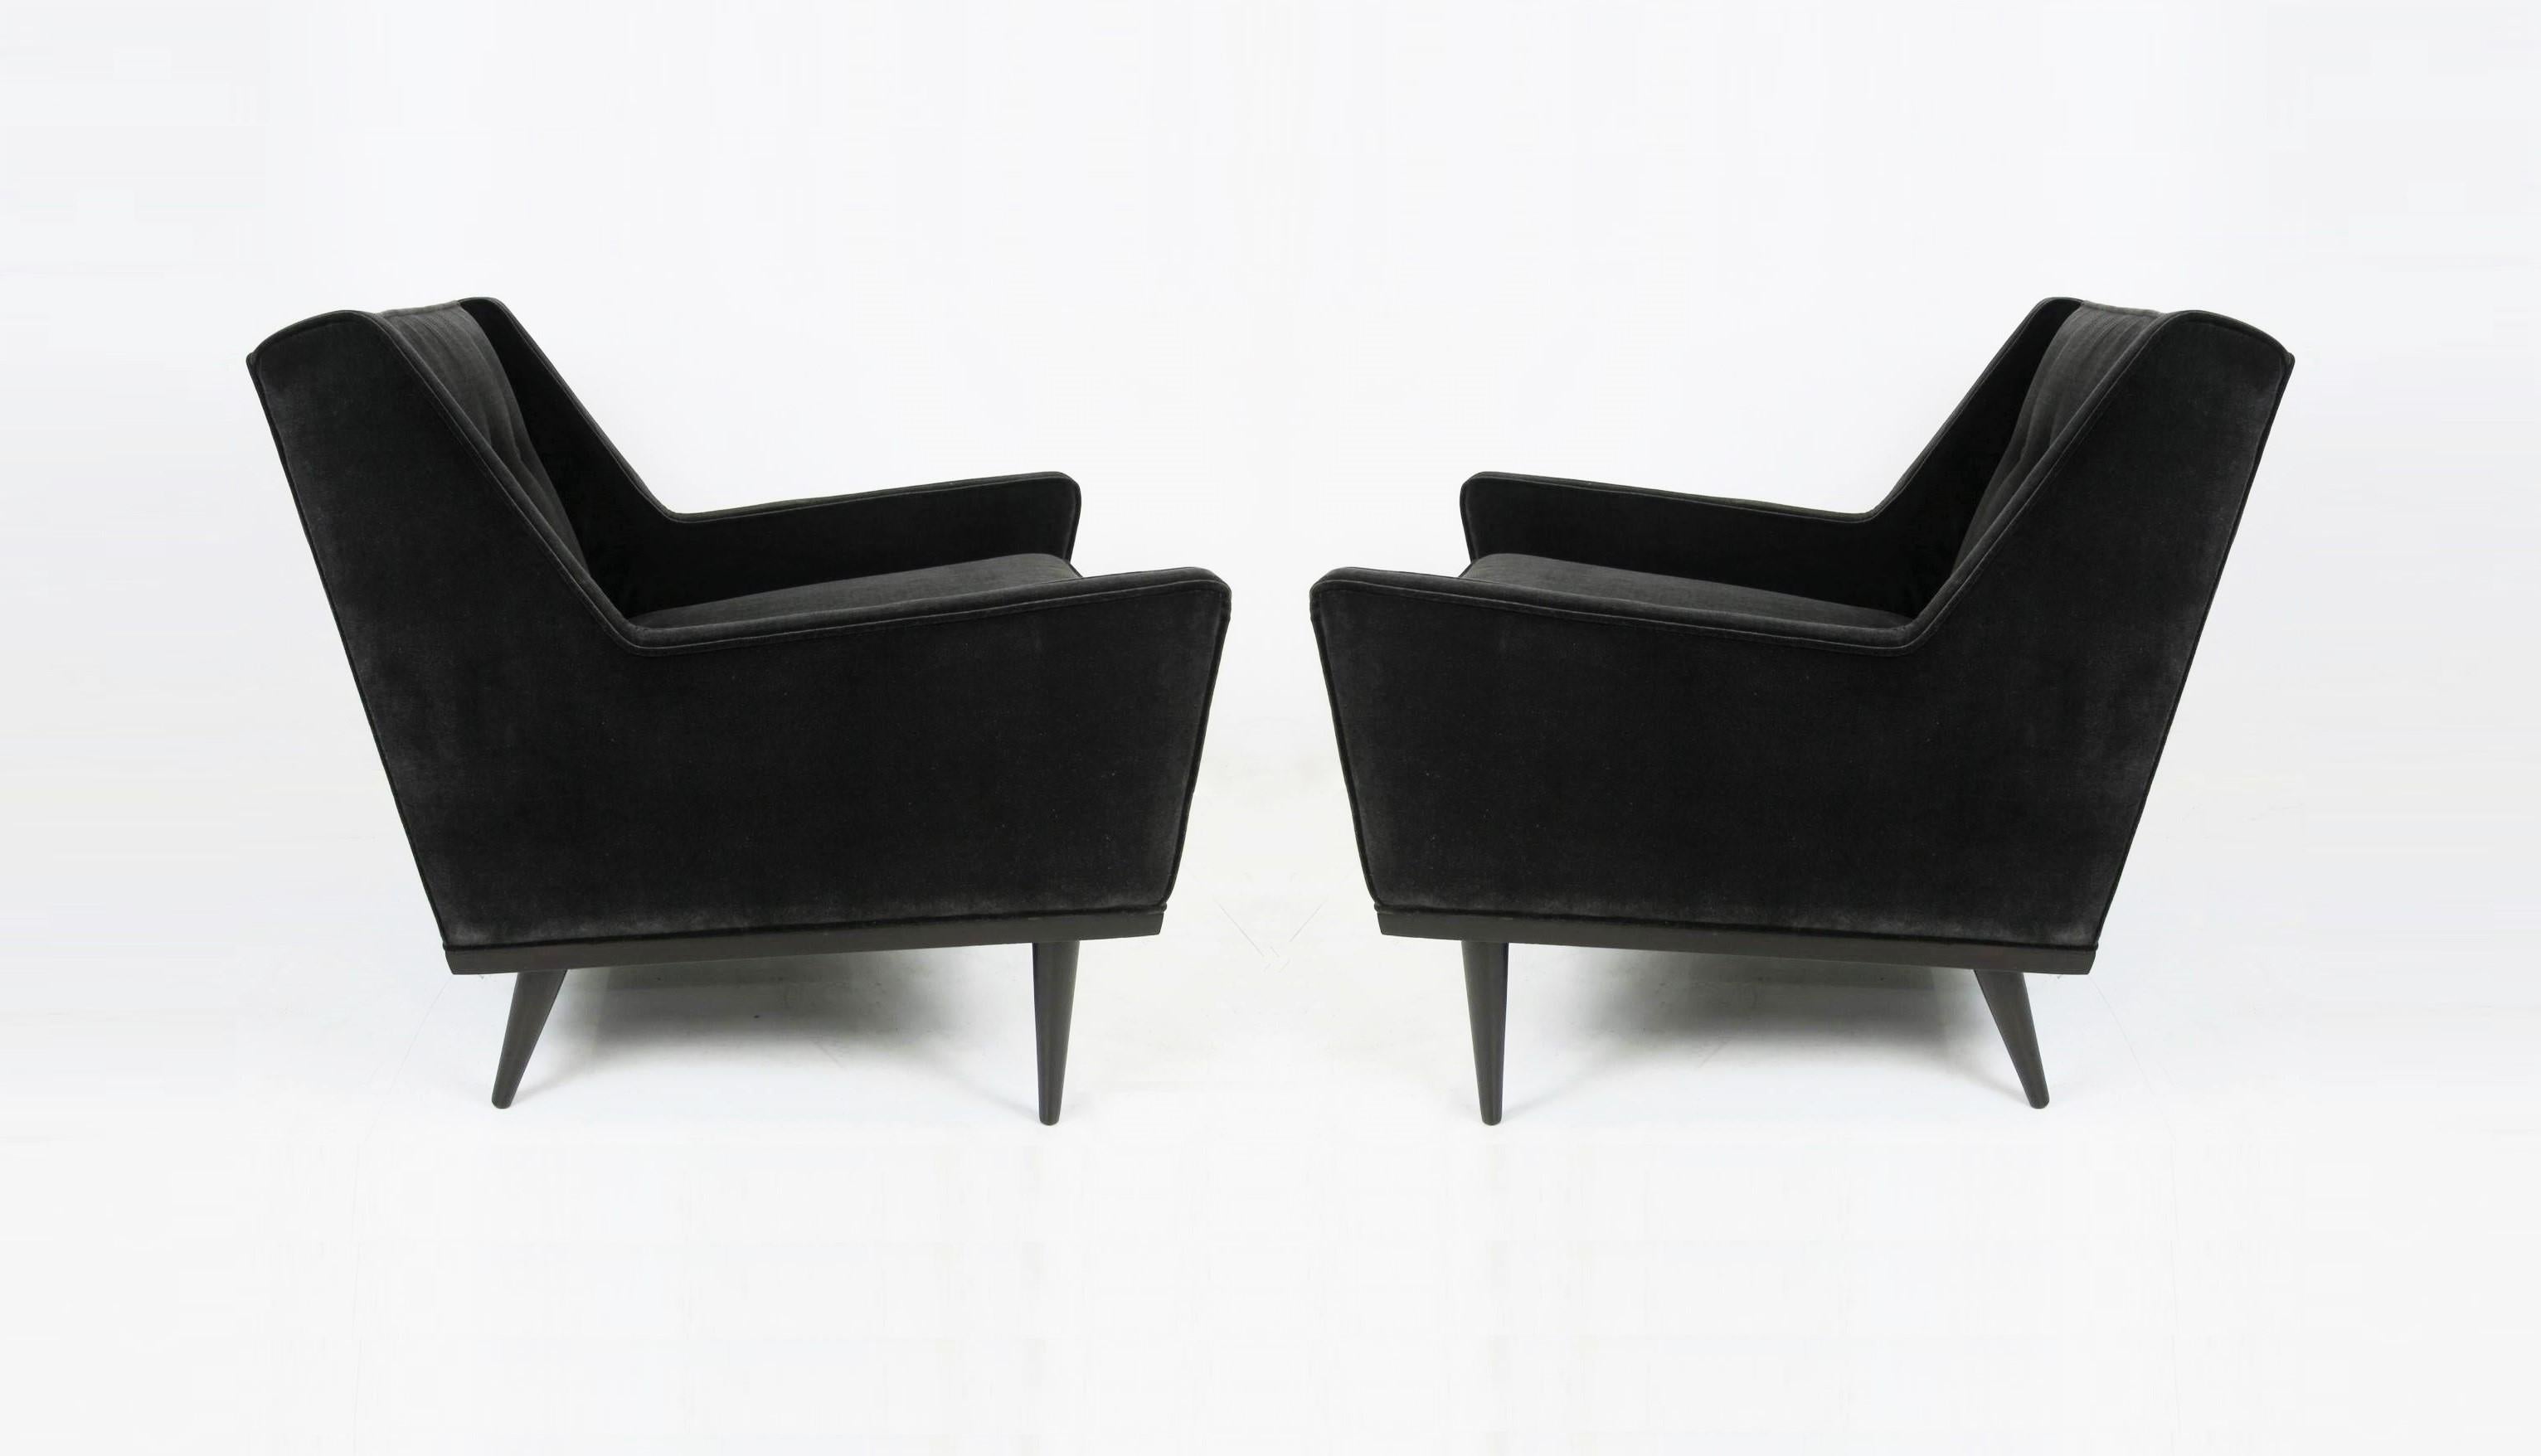 Absolutely stunning club lounge chairs designed by Milo Baughman for James Inc – an early imprint of Thayer Coggin. Defined by their Classic midcentury lines and simple walnut framed base. This pair features sculptural low slung form, pointed